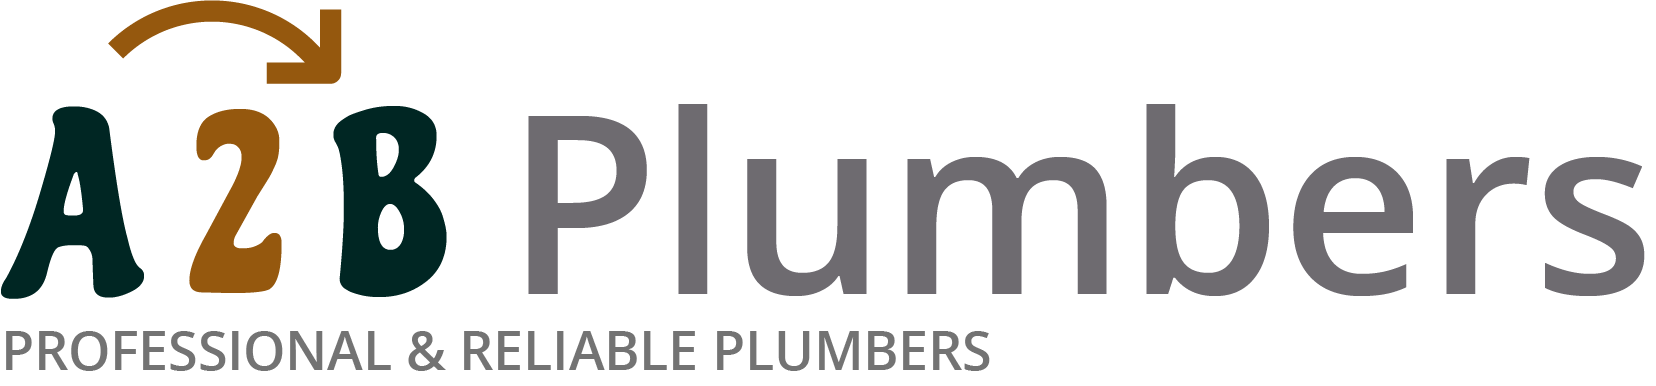 If you need a boiler installed, a radiator repaired or a leaking tap fixed, call us now - we provide services for properties in Kings Lynn and the local area.